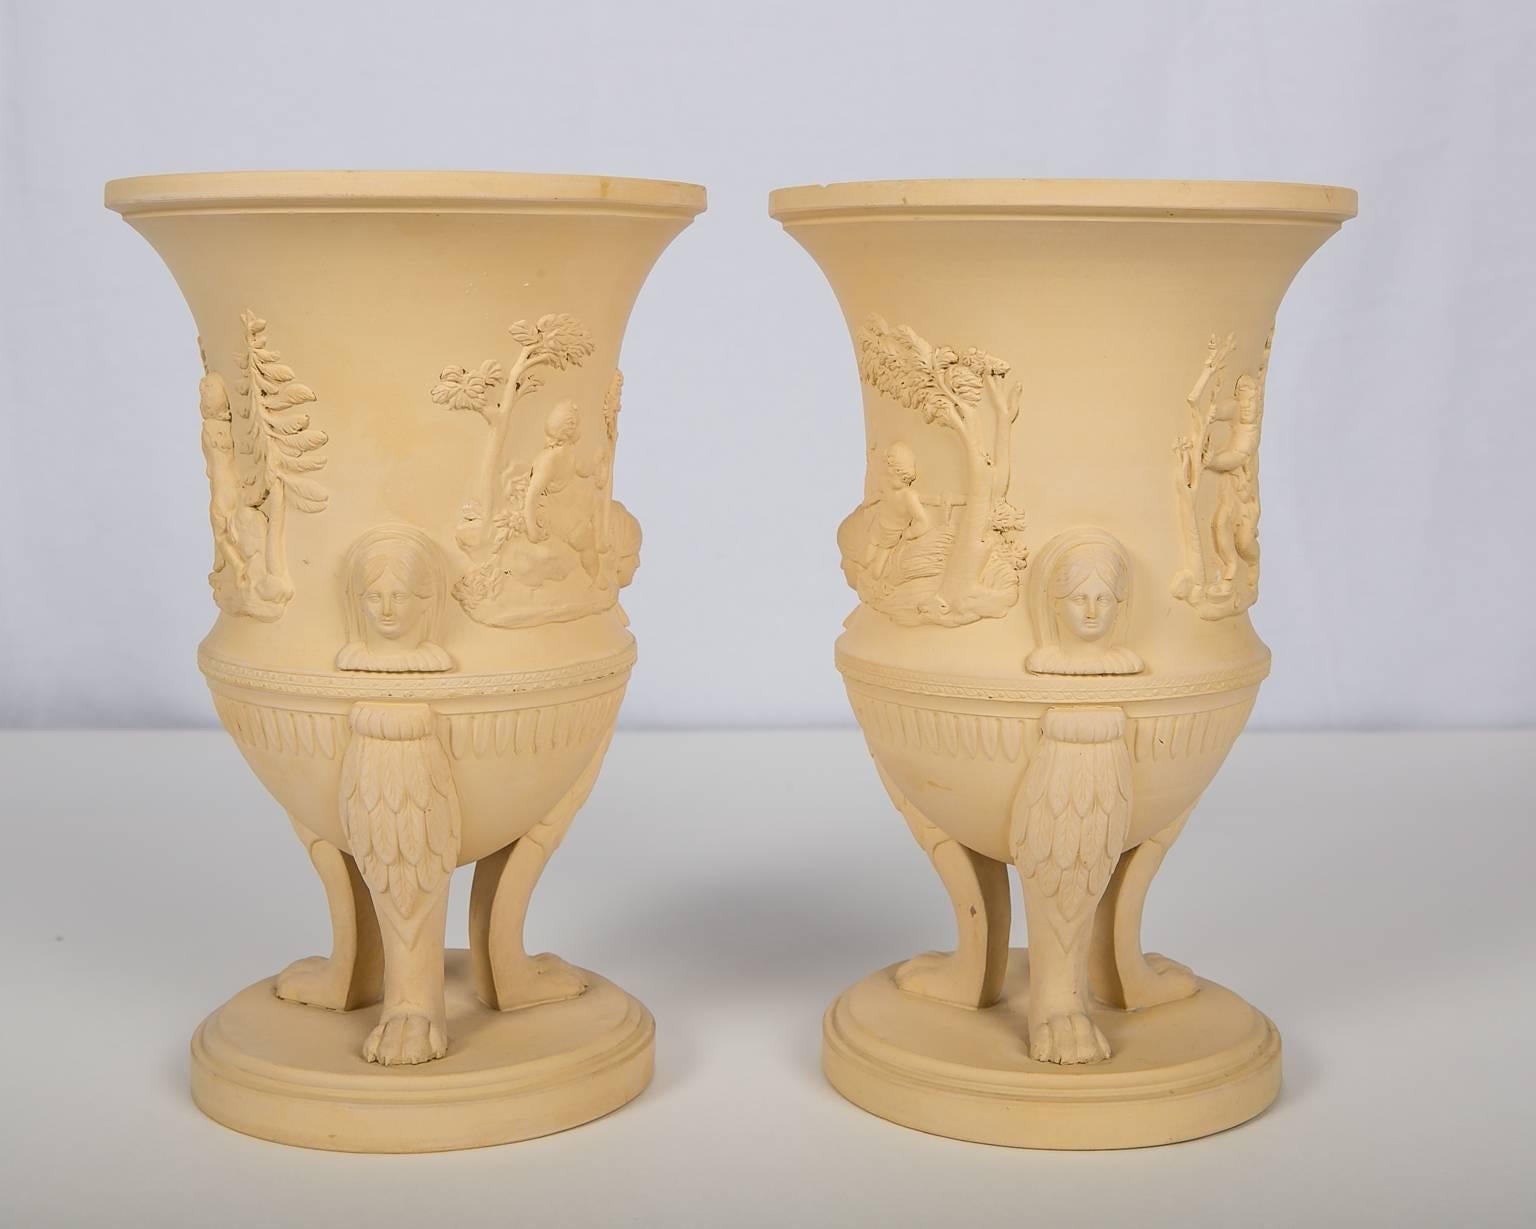 Pair of Neoclassical Vases the Color of Cane Sugar Made circa 1780-1800 5